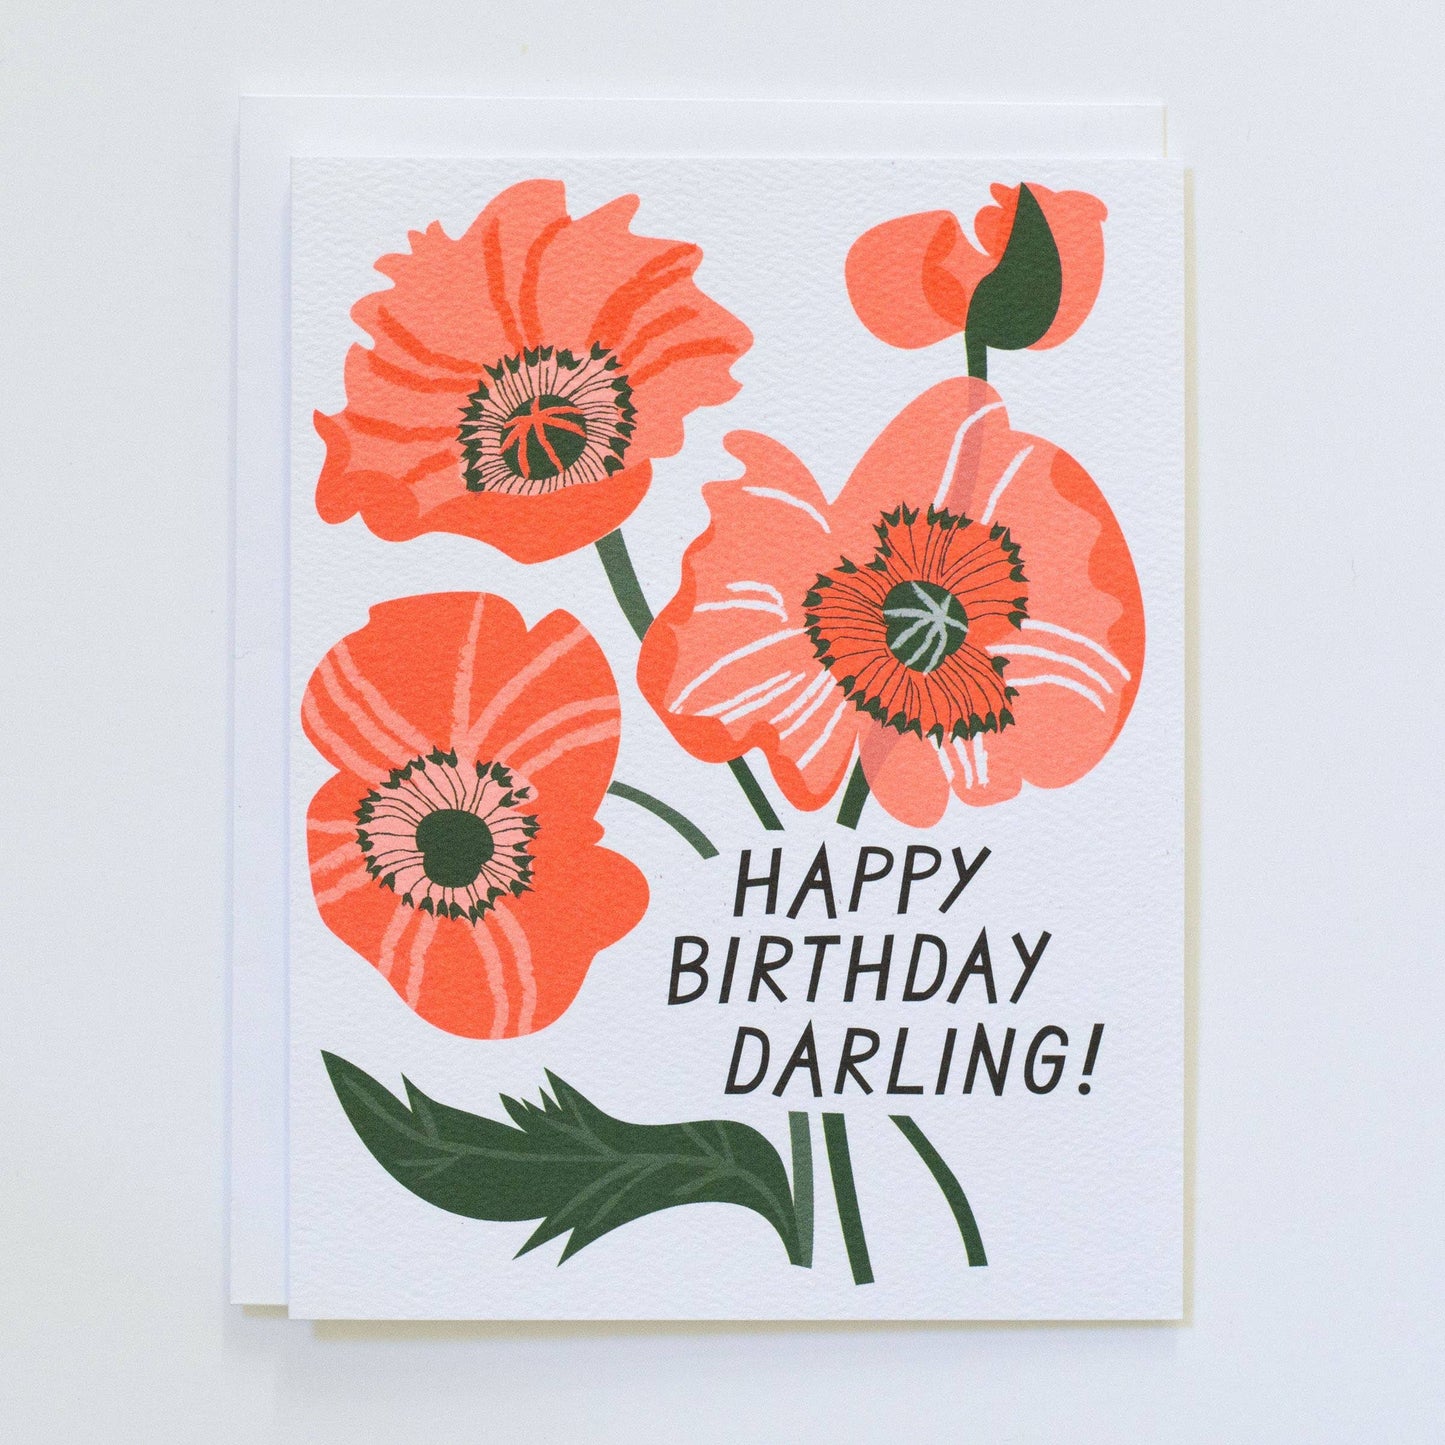 Happy Birthday Darling - Poppies Note Card